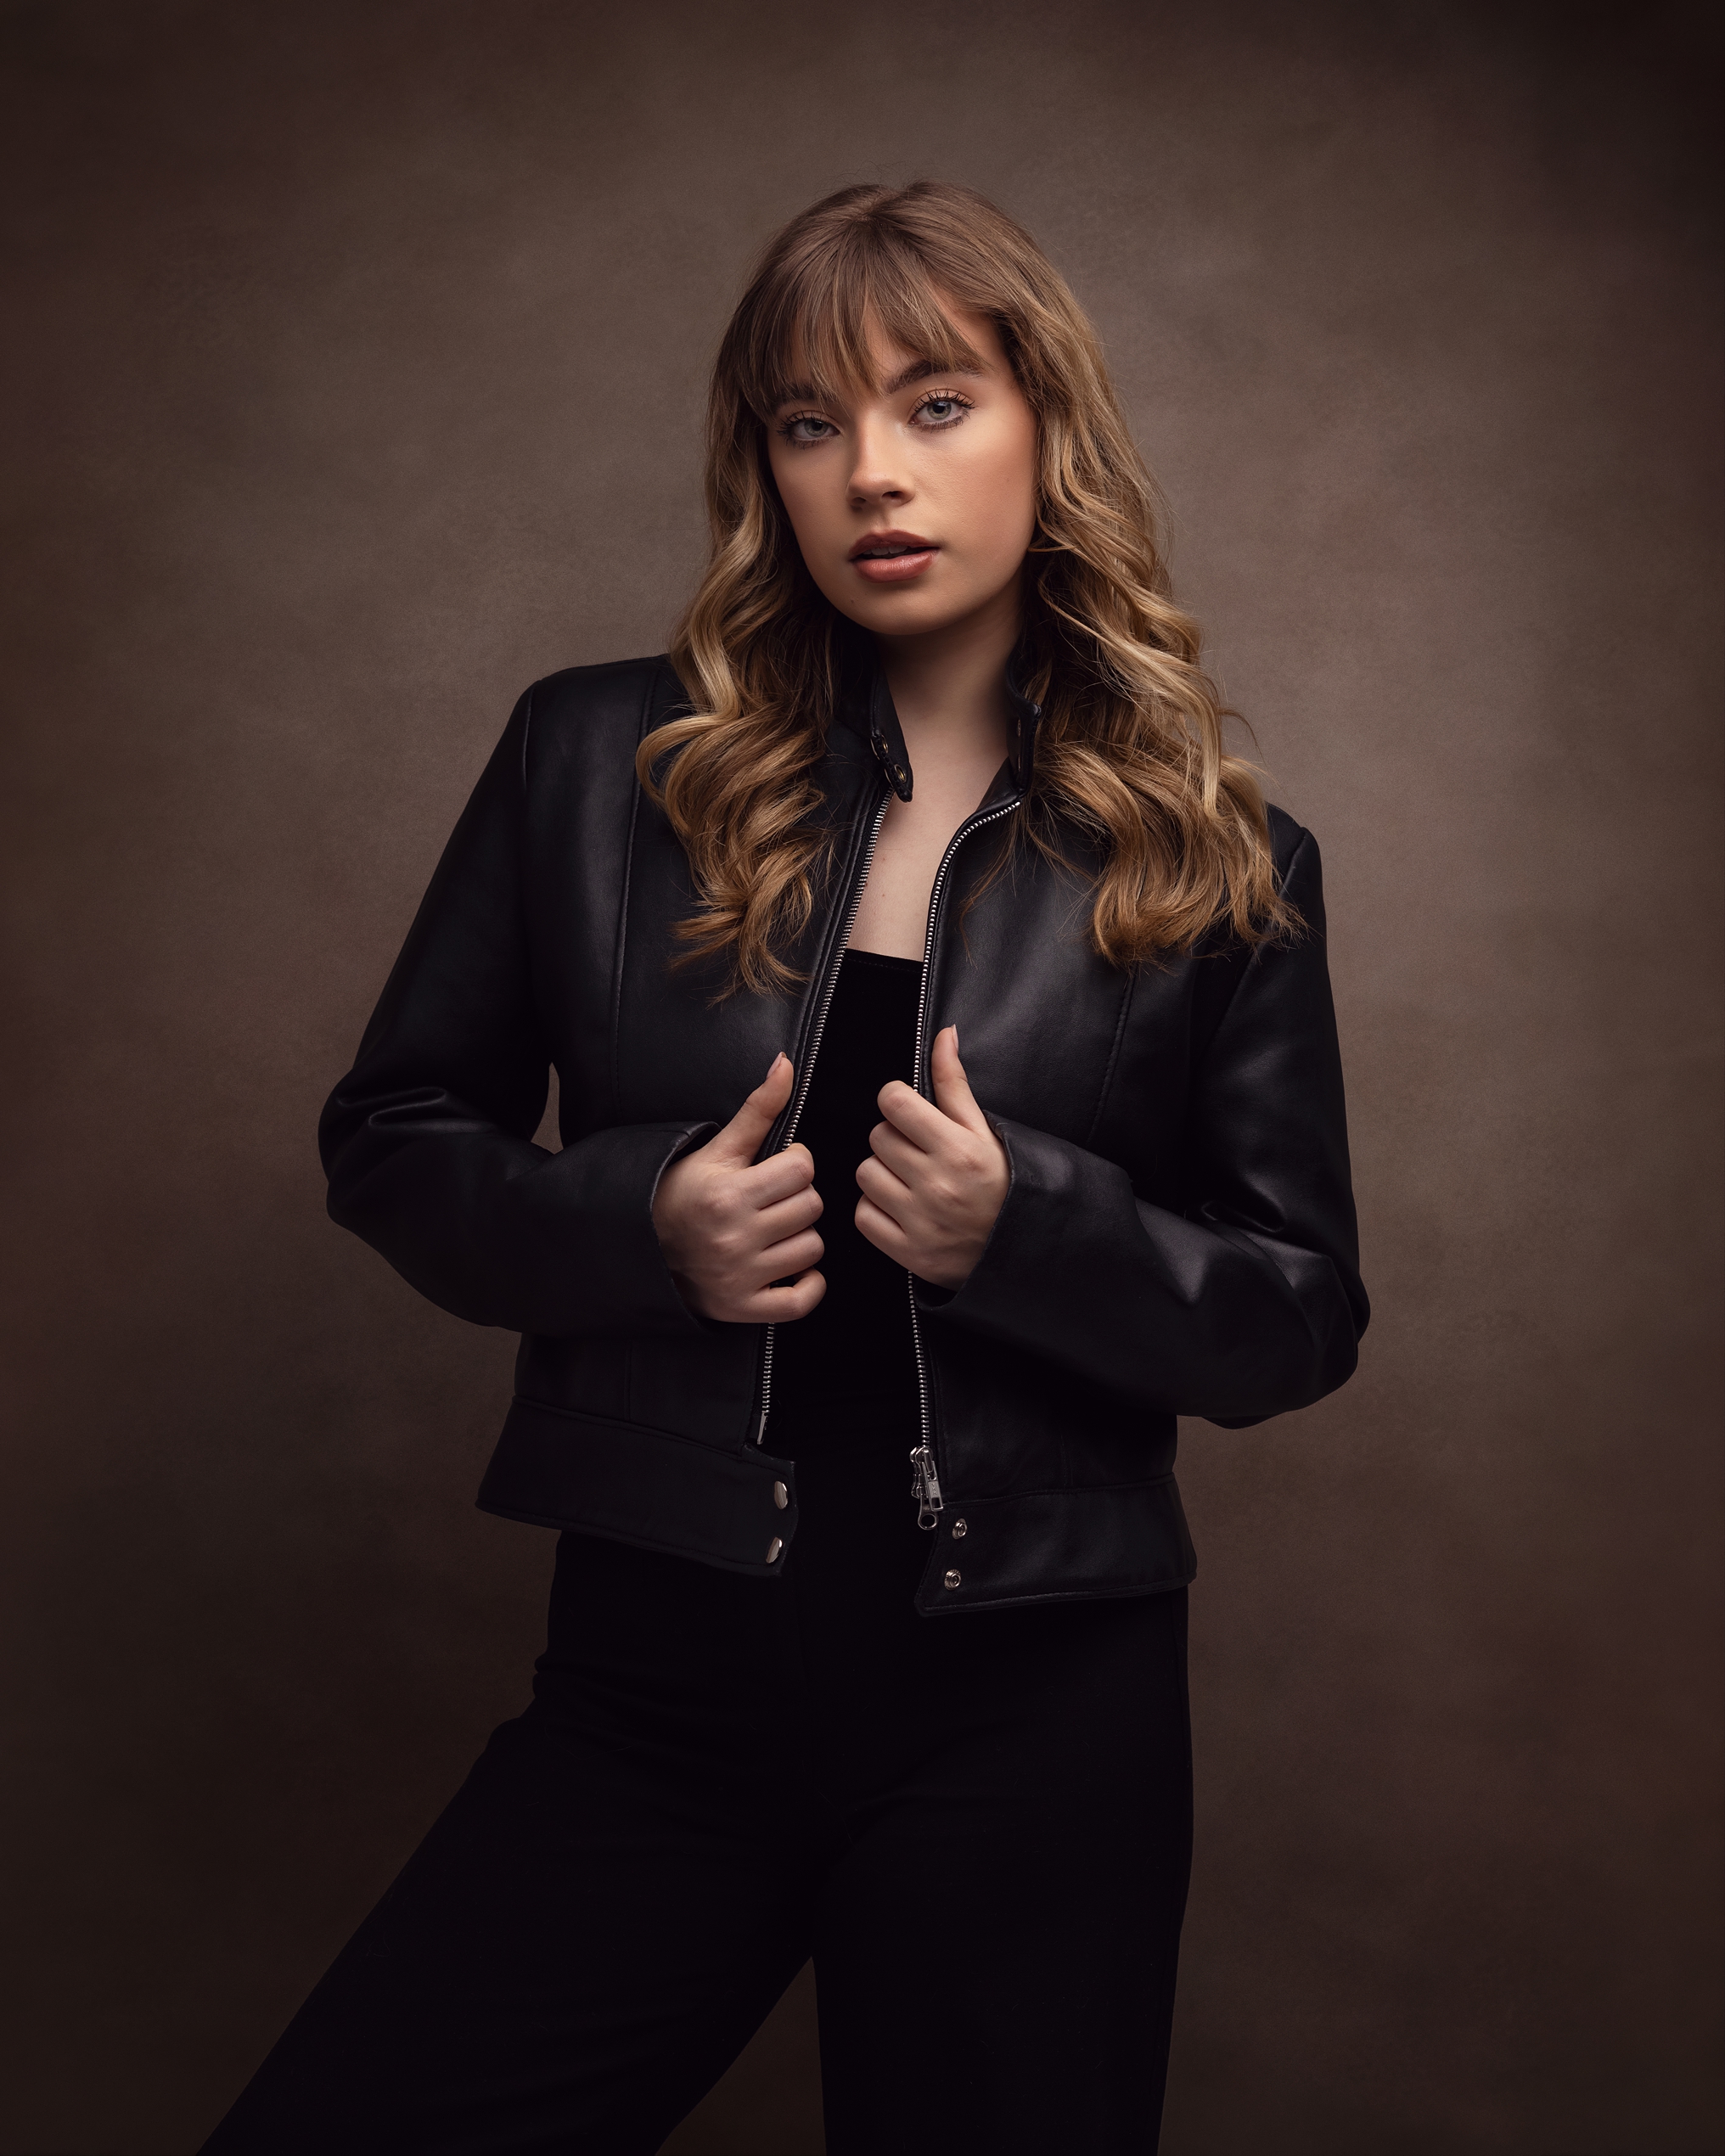 Teenage girl in a black leather jacket and trousers poses against a brown background